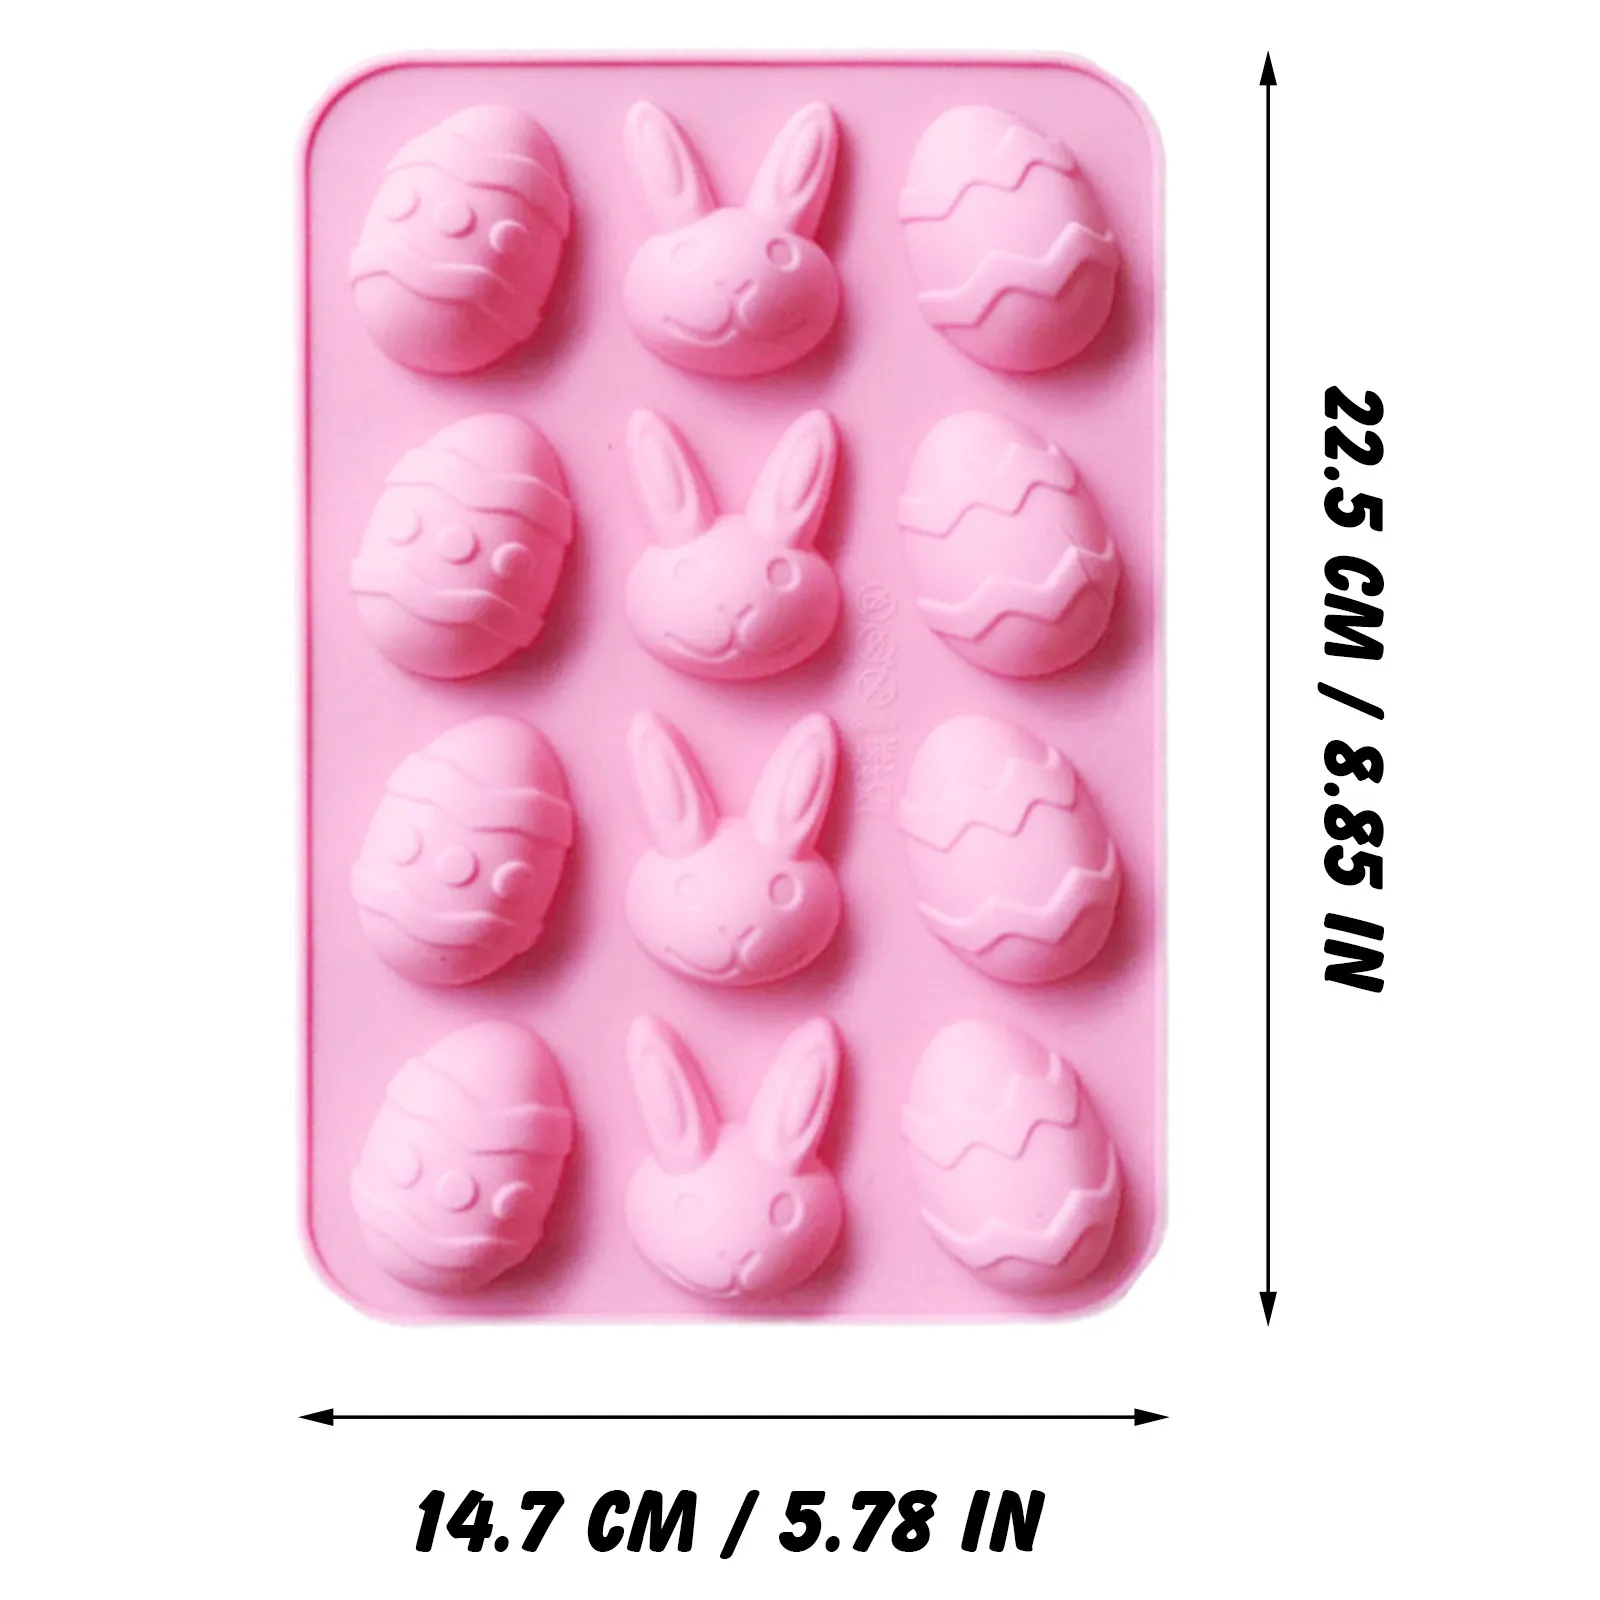 

12 Cavity Easter Egg and Easter Series Bonus Baking Easter Candy Bunny Shape Silicone Cake Chocolate Mold Fondant Cook